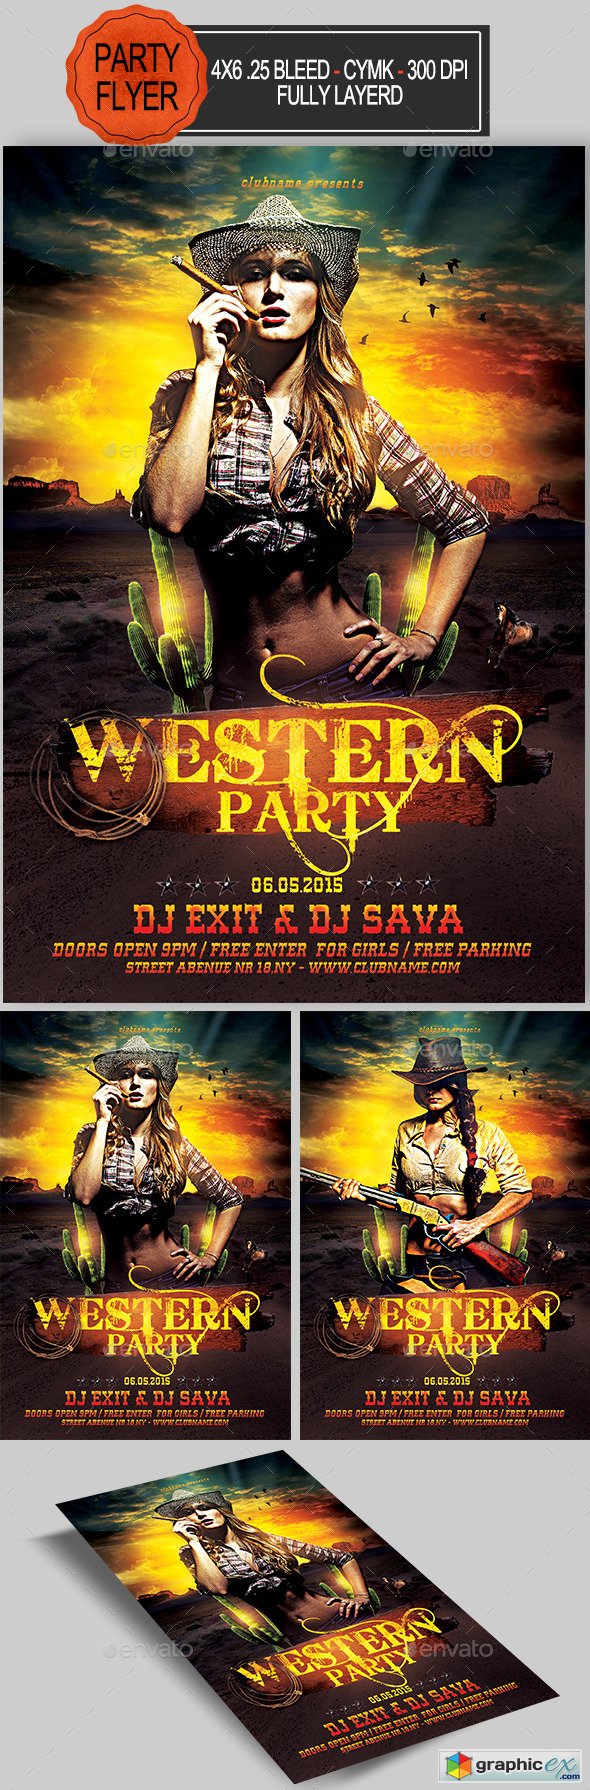 Western Party Flyer 11561353